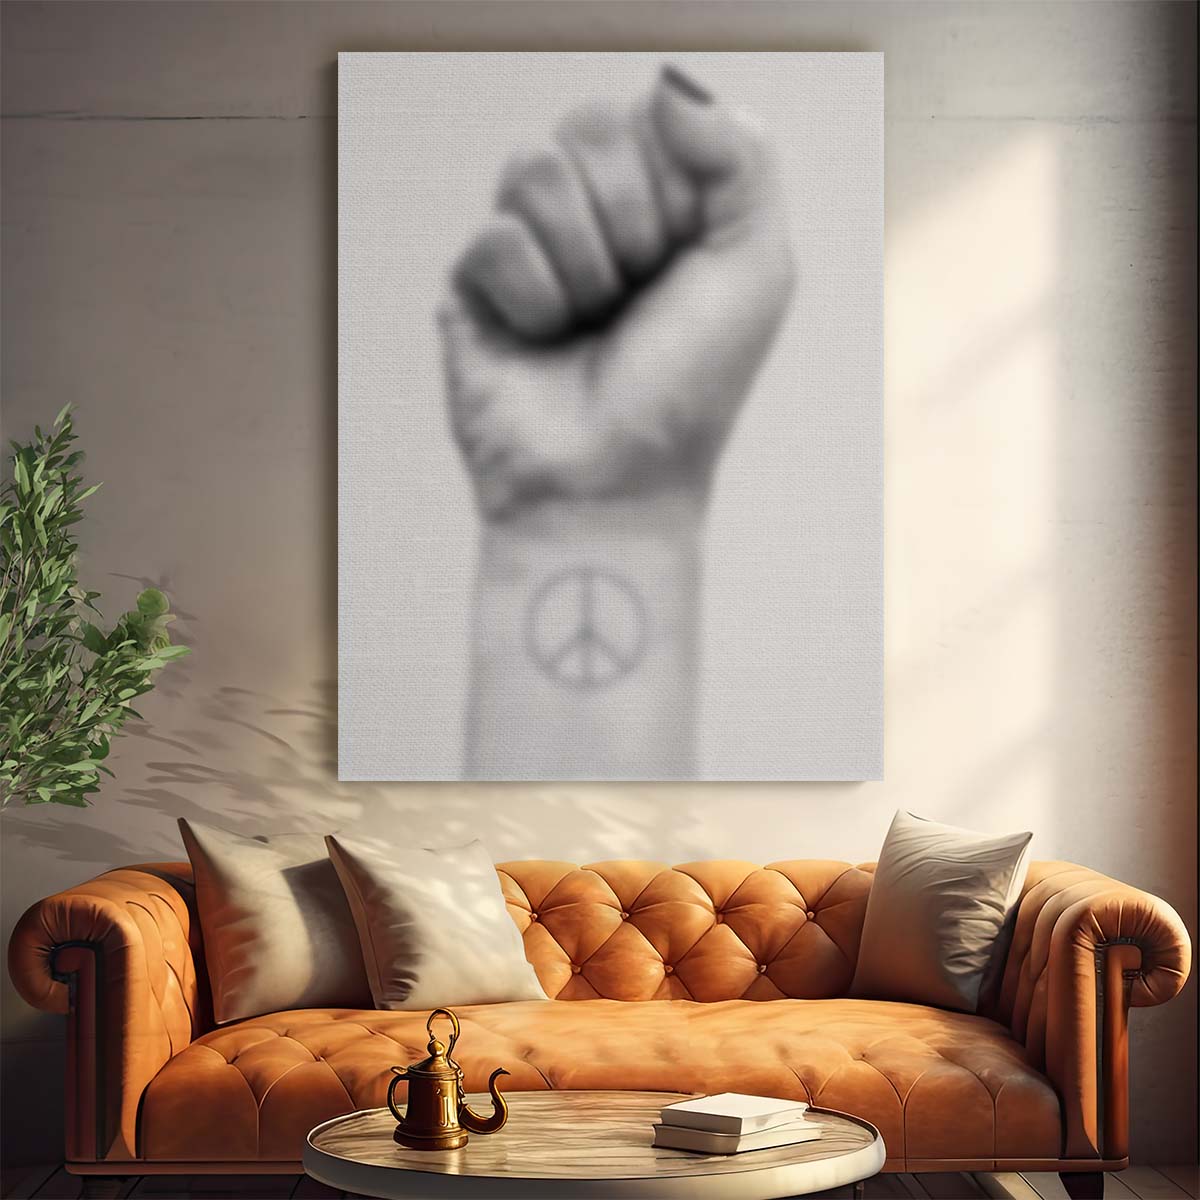 Monochrome Peace Sign Tattoo Illustration - Girl Power, Challenge & Equality by Luxuriance Designs, made in USA